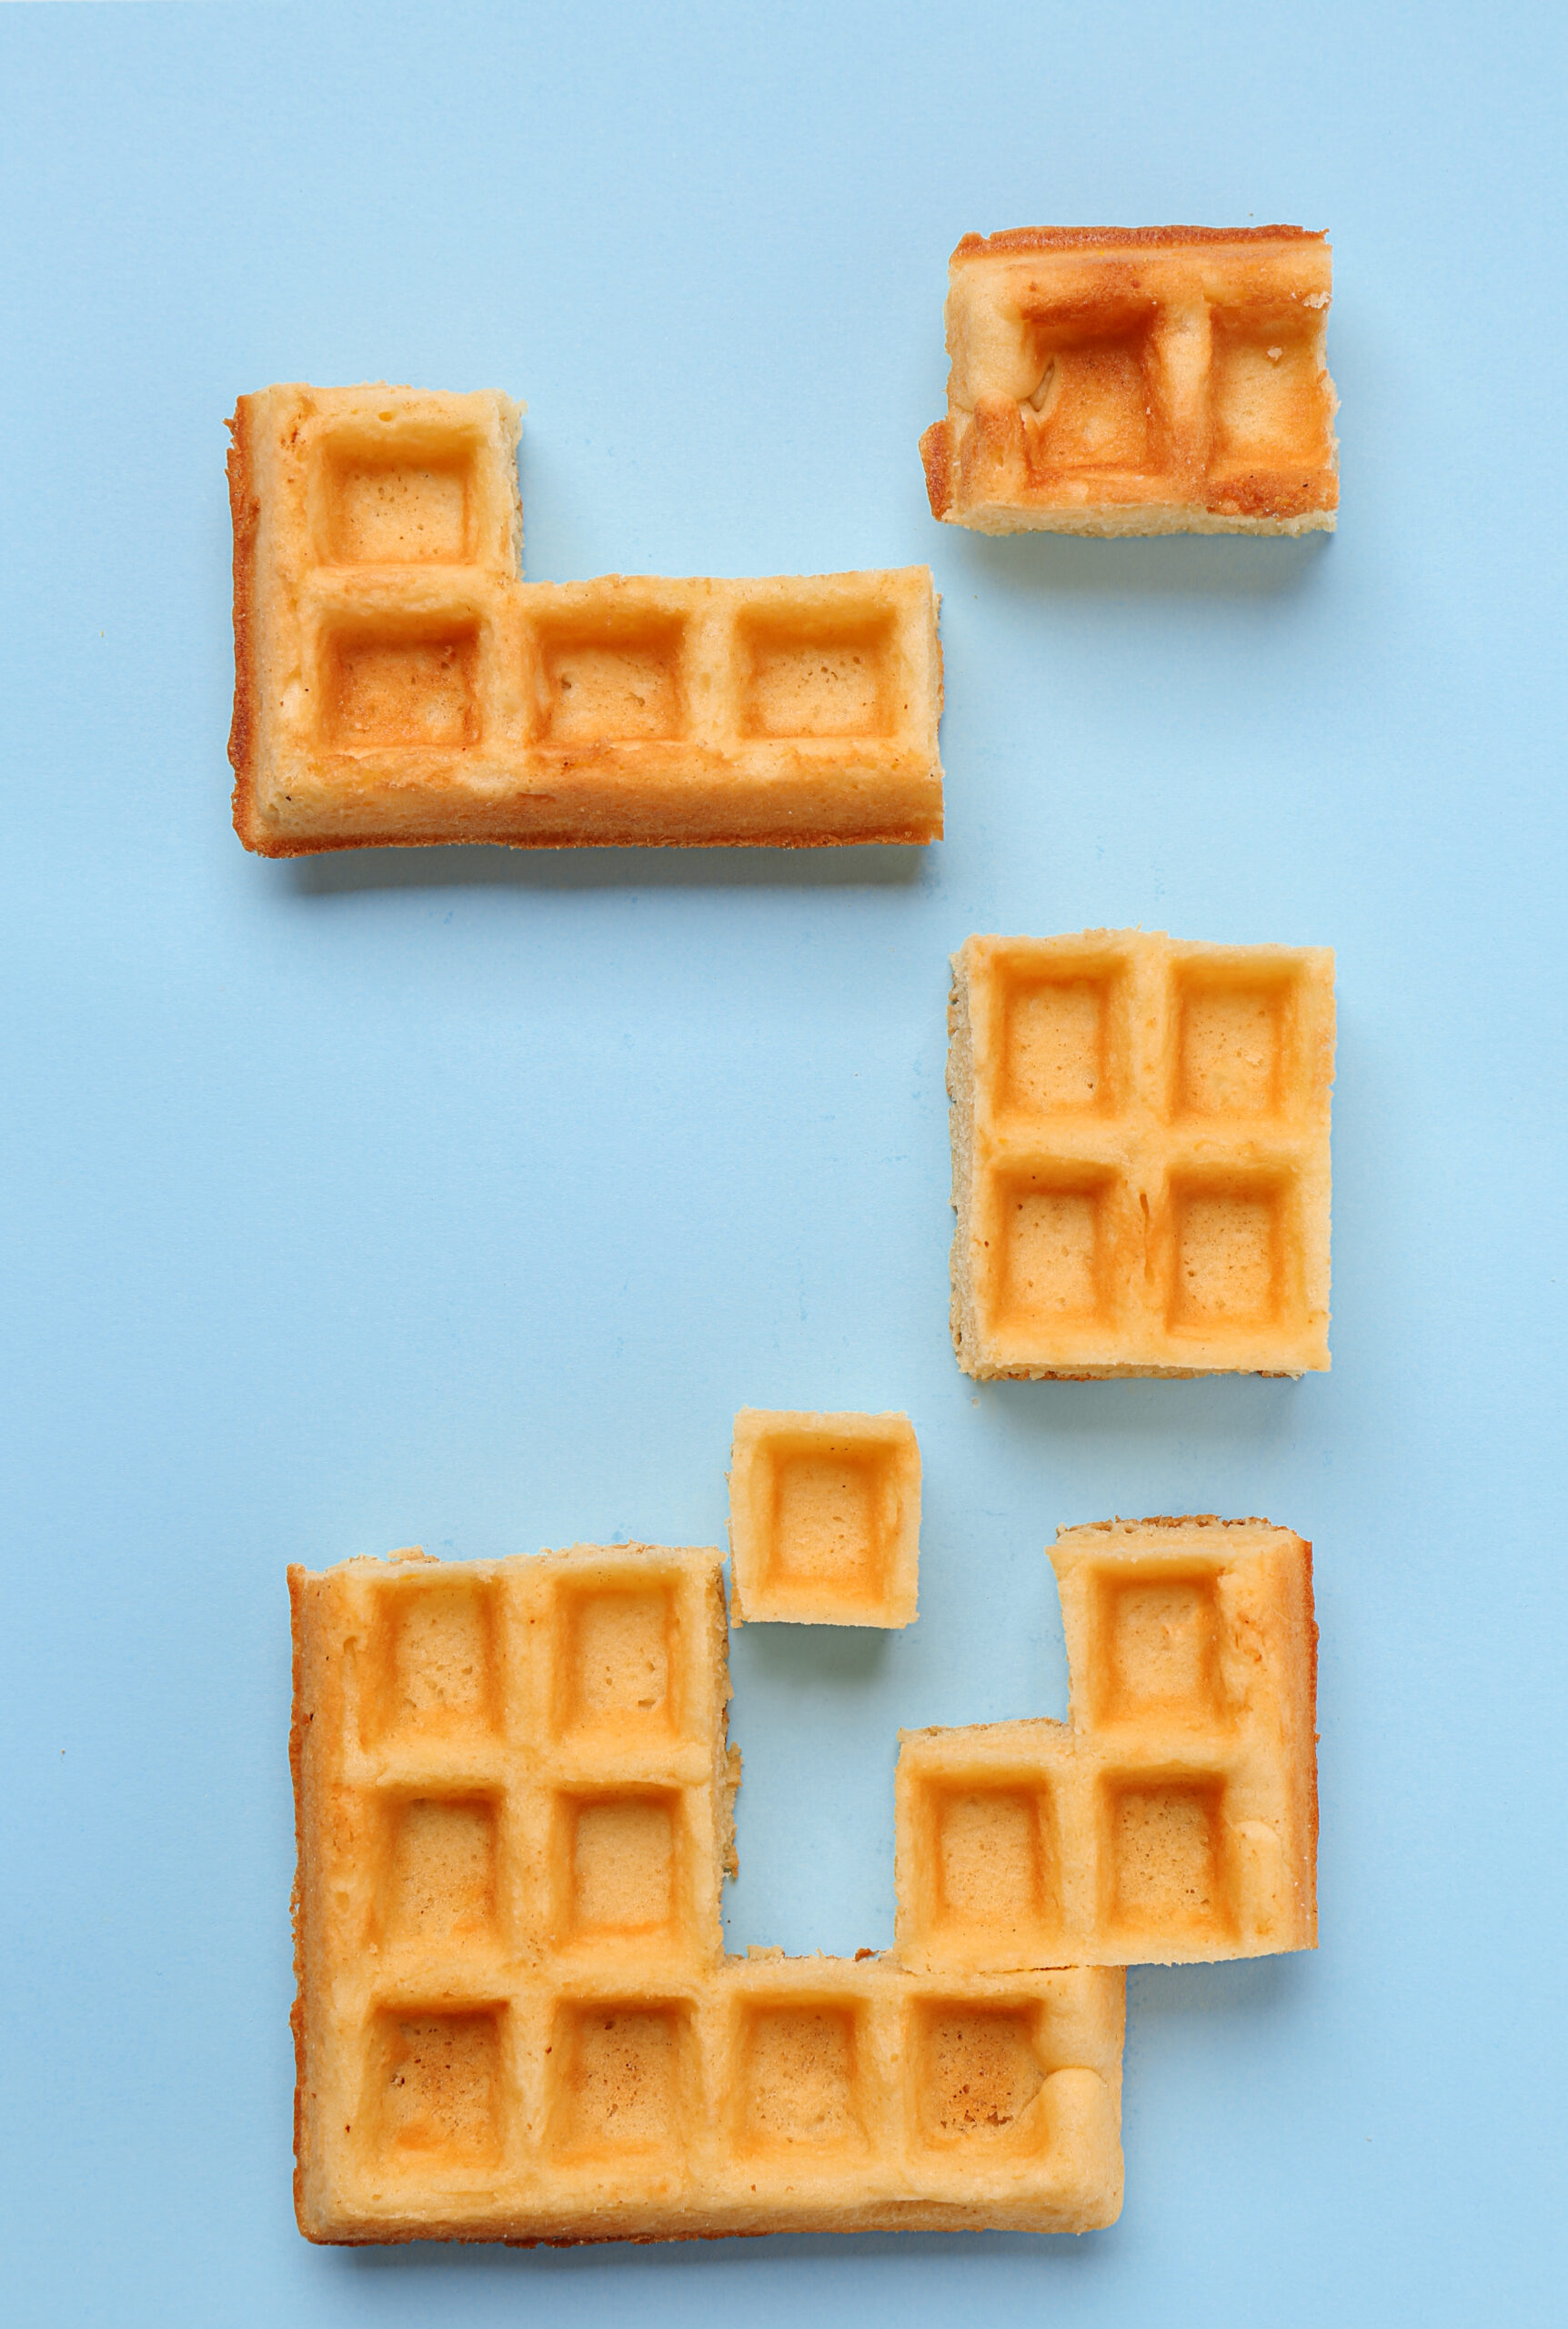 adding and subtracting parts of waffles